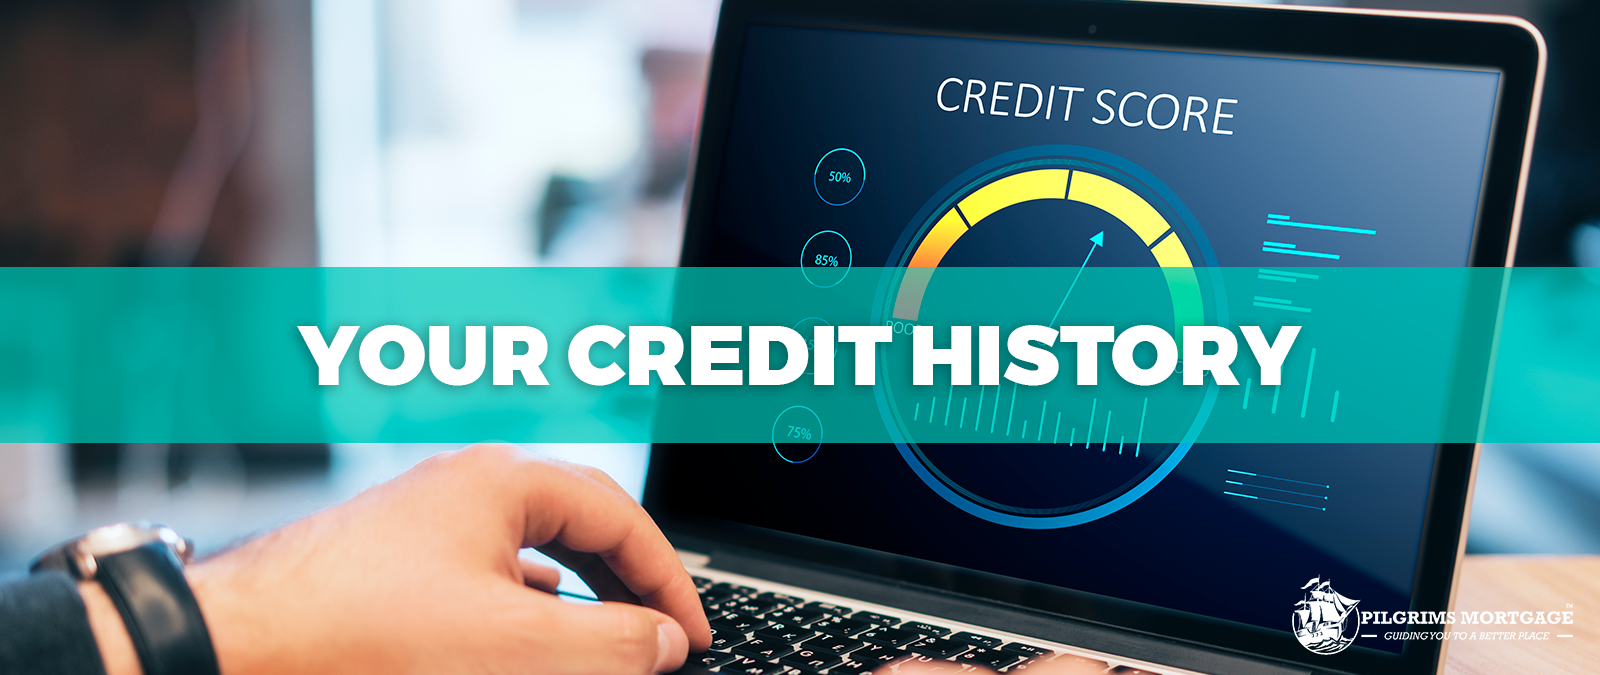 Your Credit History